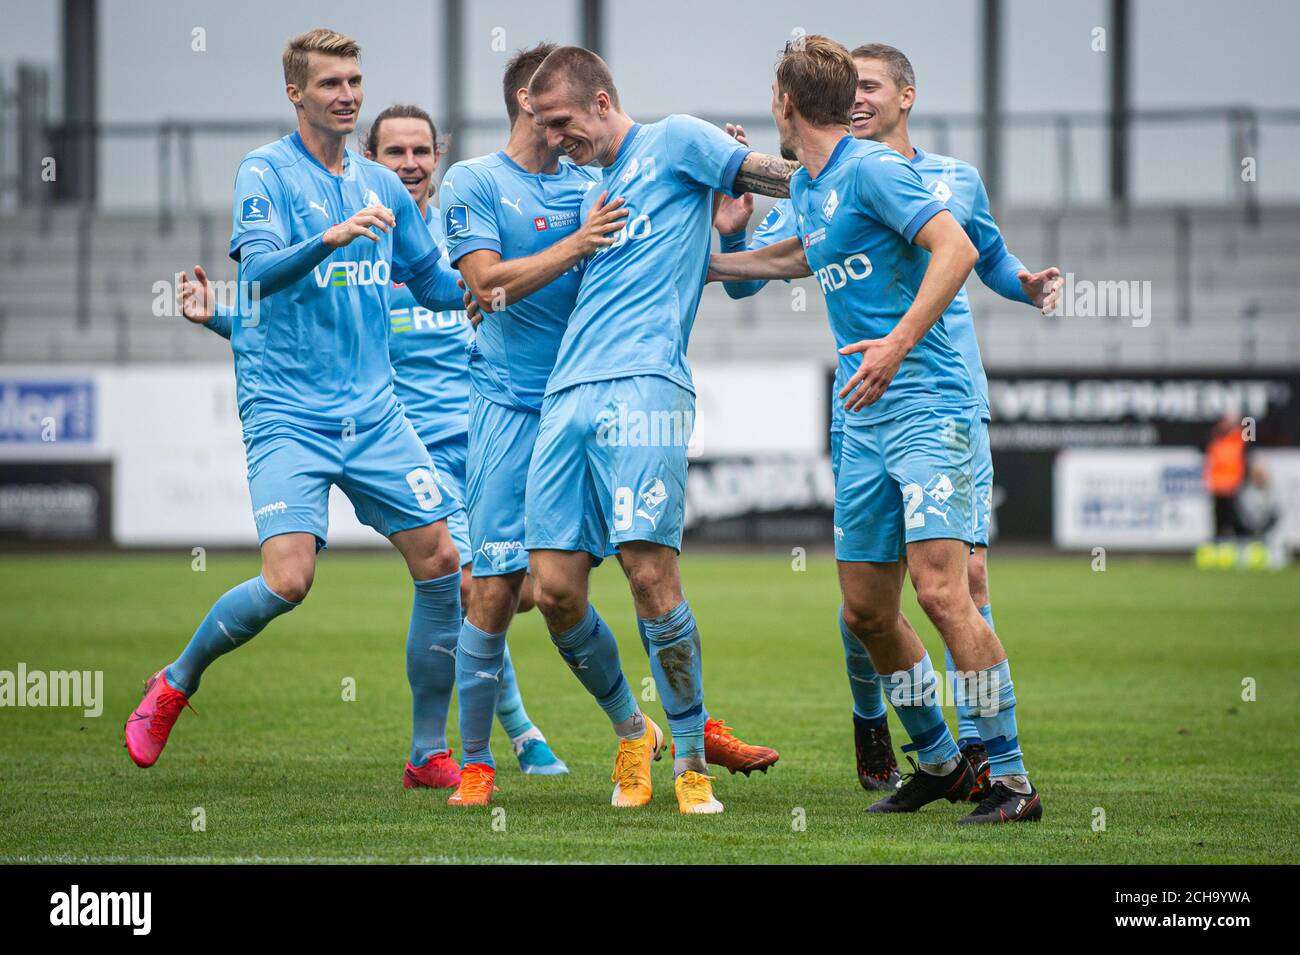 Horsens, Denmark. 13th Sep, 2020. Emil Riis Jakobsen (9) of Randers FC scores for 0-2 during the 3F Superliga match between AC Horsens and Randers FC at Casa Arena in (Photo